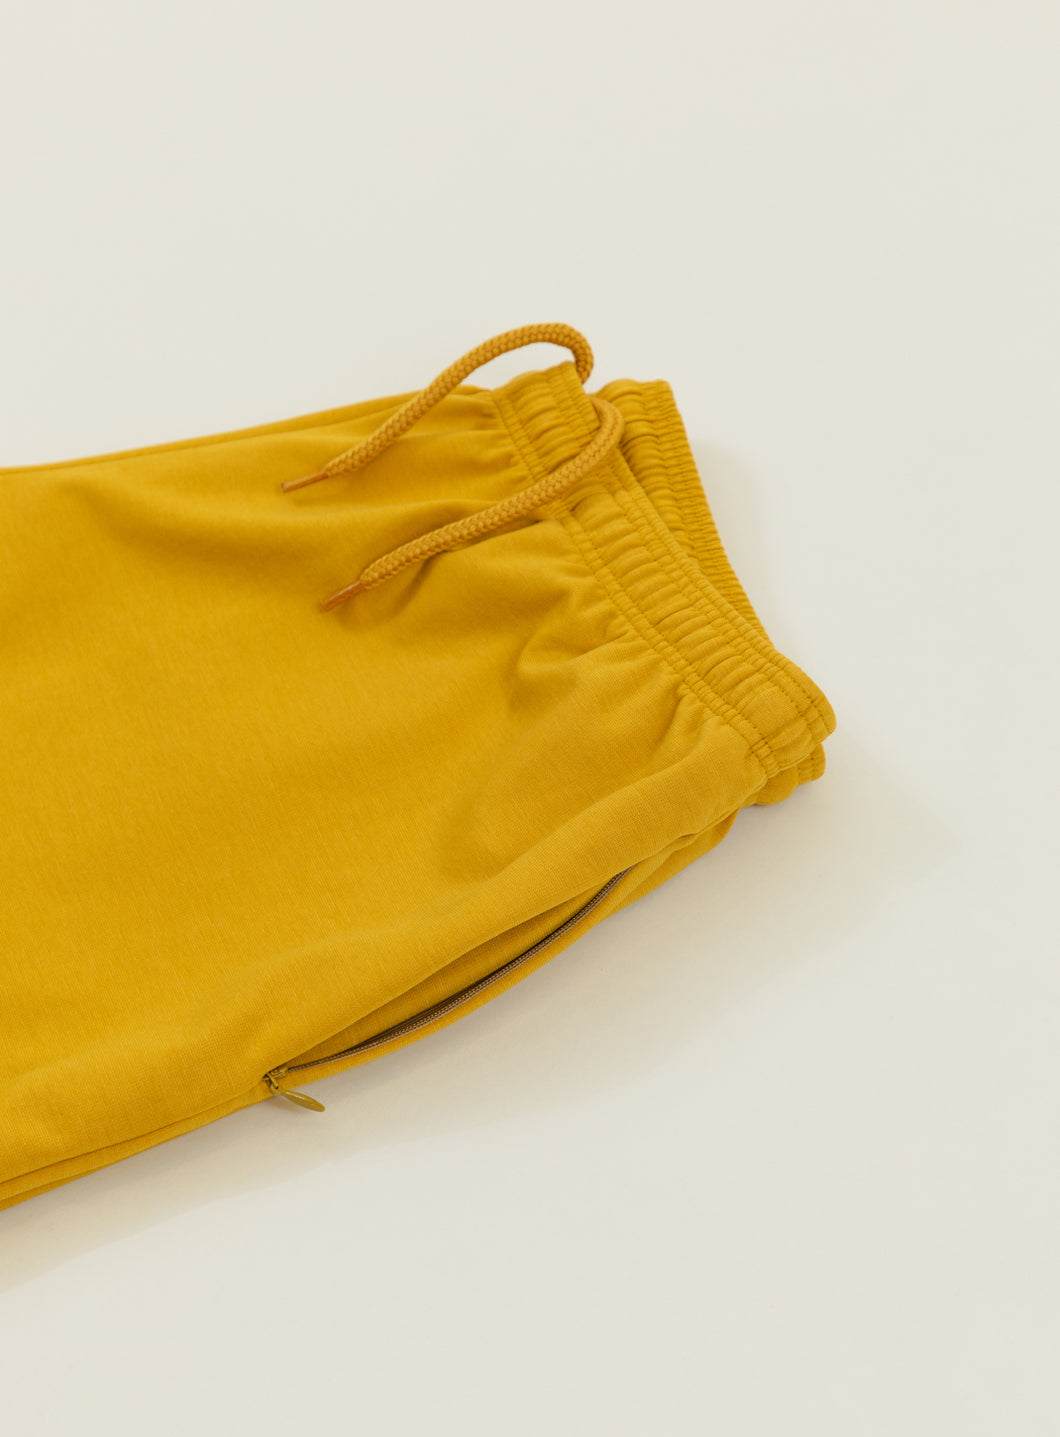 Sport Shorts in Mustard Yellow Technical Knit